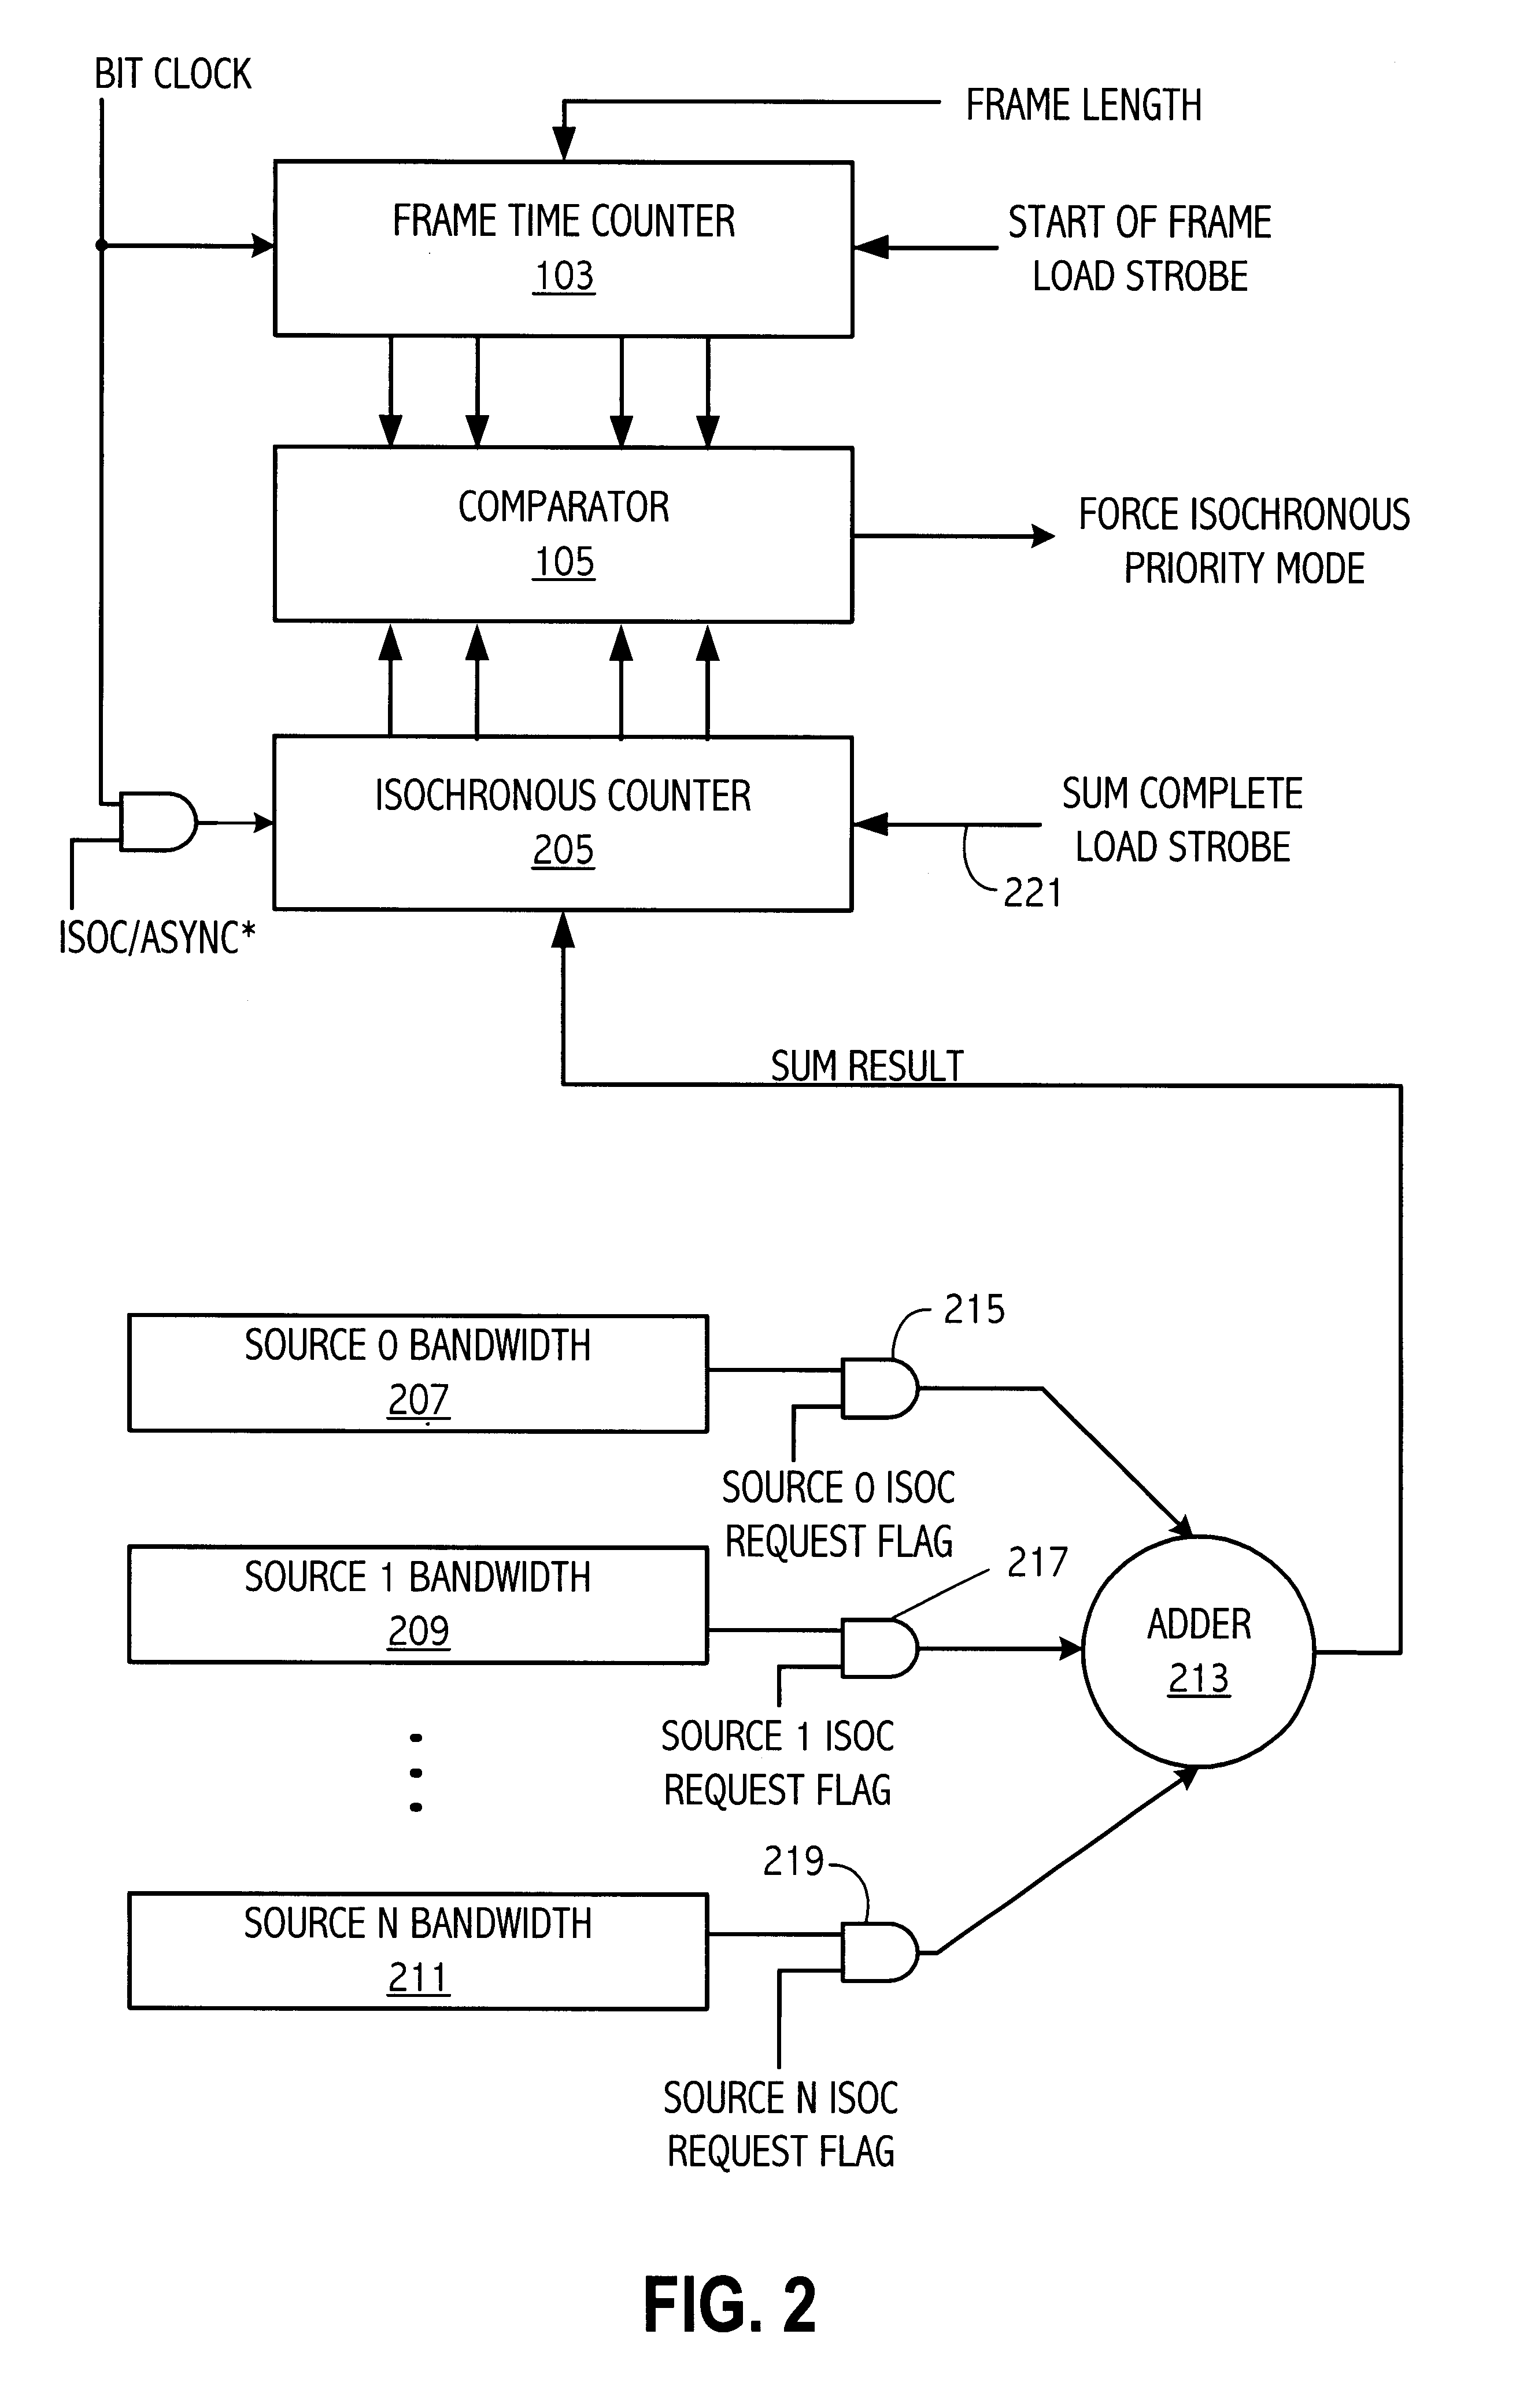 Dynamic scheduling mechanism for an asynchronous/isochronous integrated circuit interconnect bus